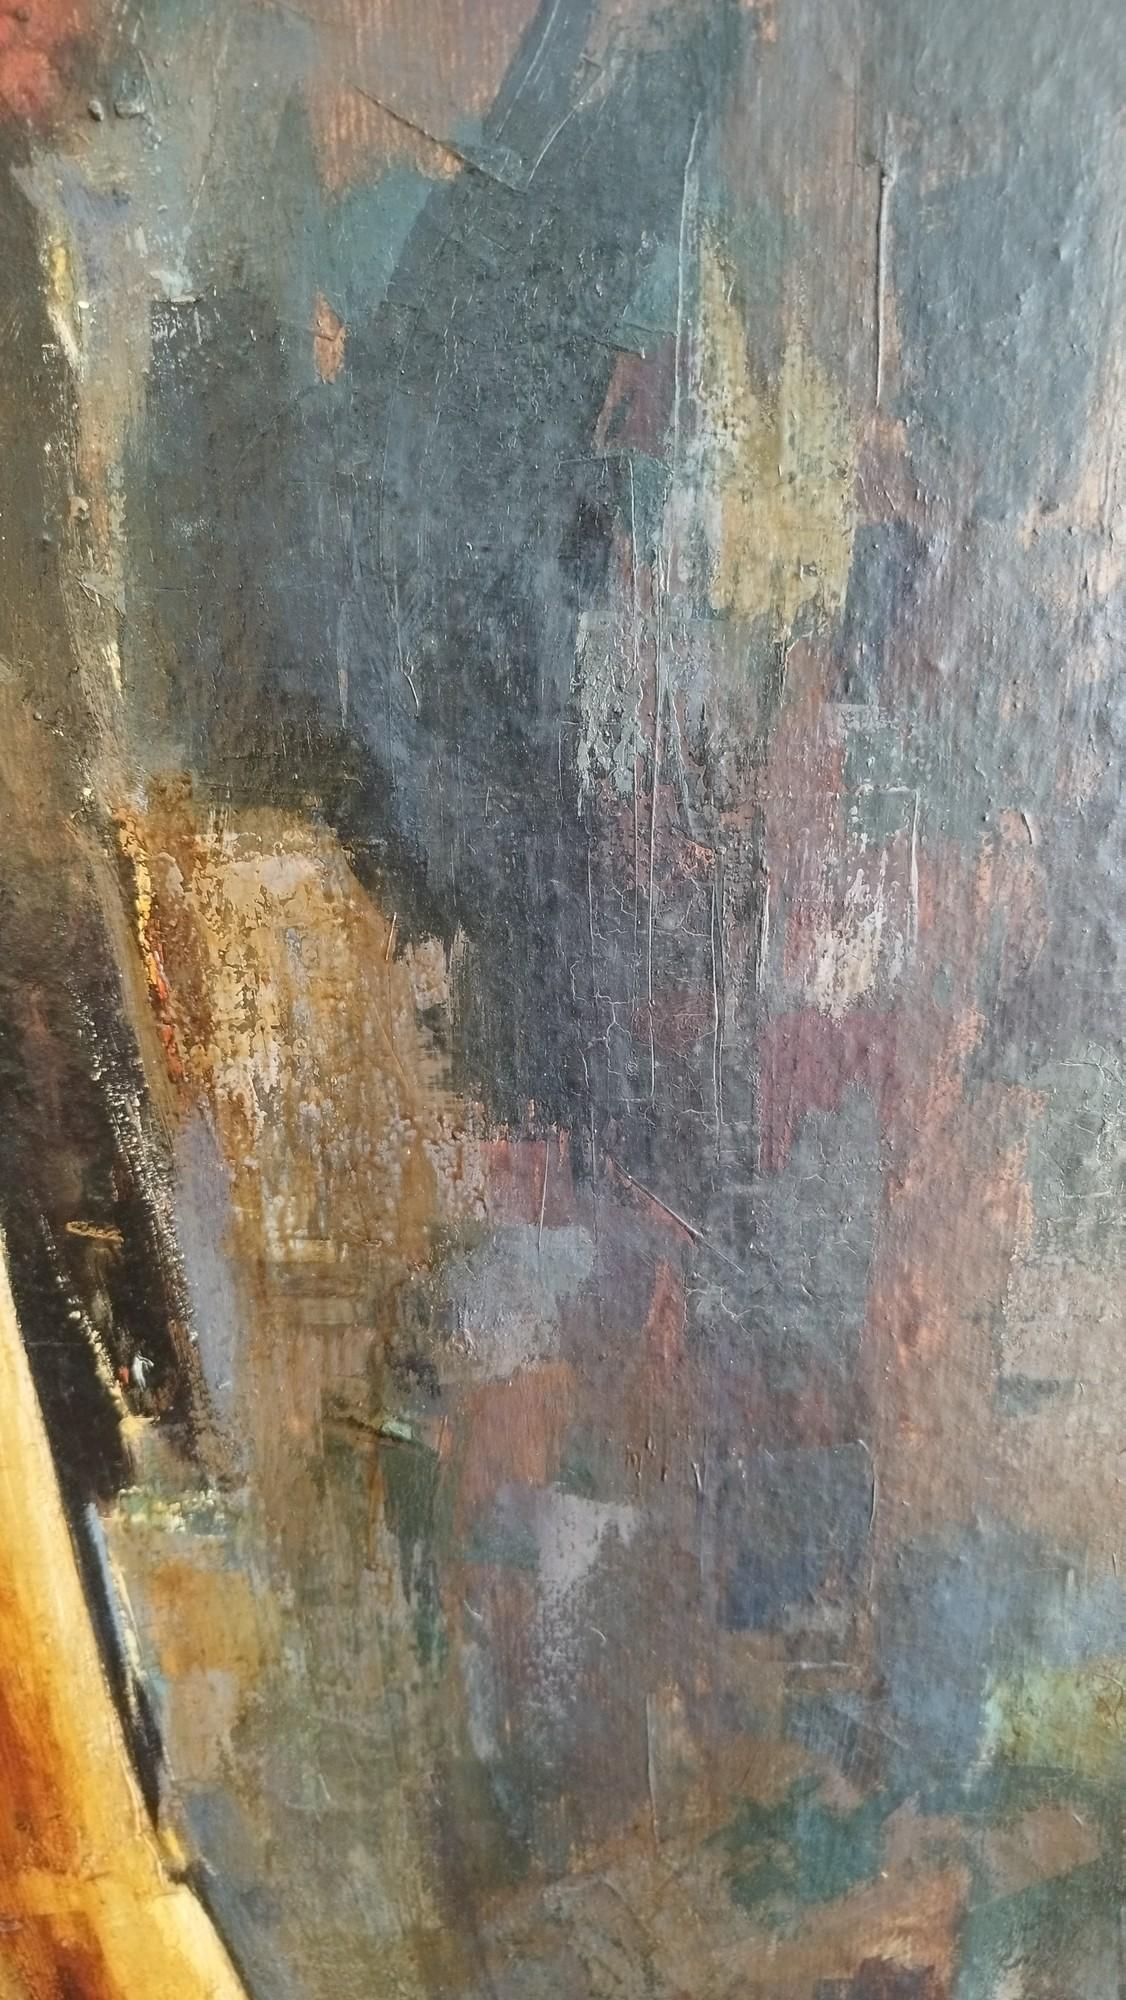 Large oil painting on paper affixed to a wooden panel. It is from artist Michel Nourry (1927-2006), signed and dated 1969. The depth of all the colors is very warm and just superb.

Do not hesitate to contact me for a shipping quote.